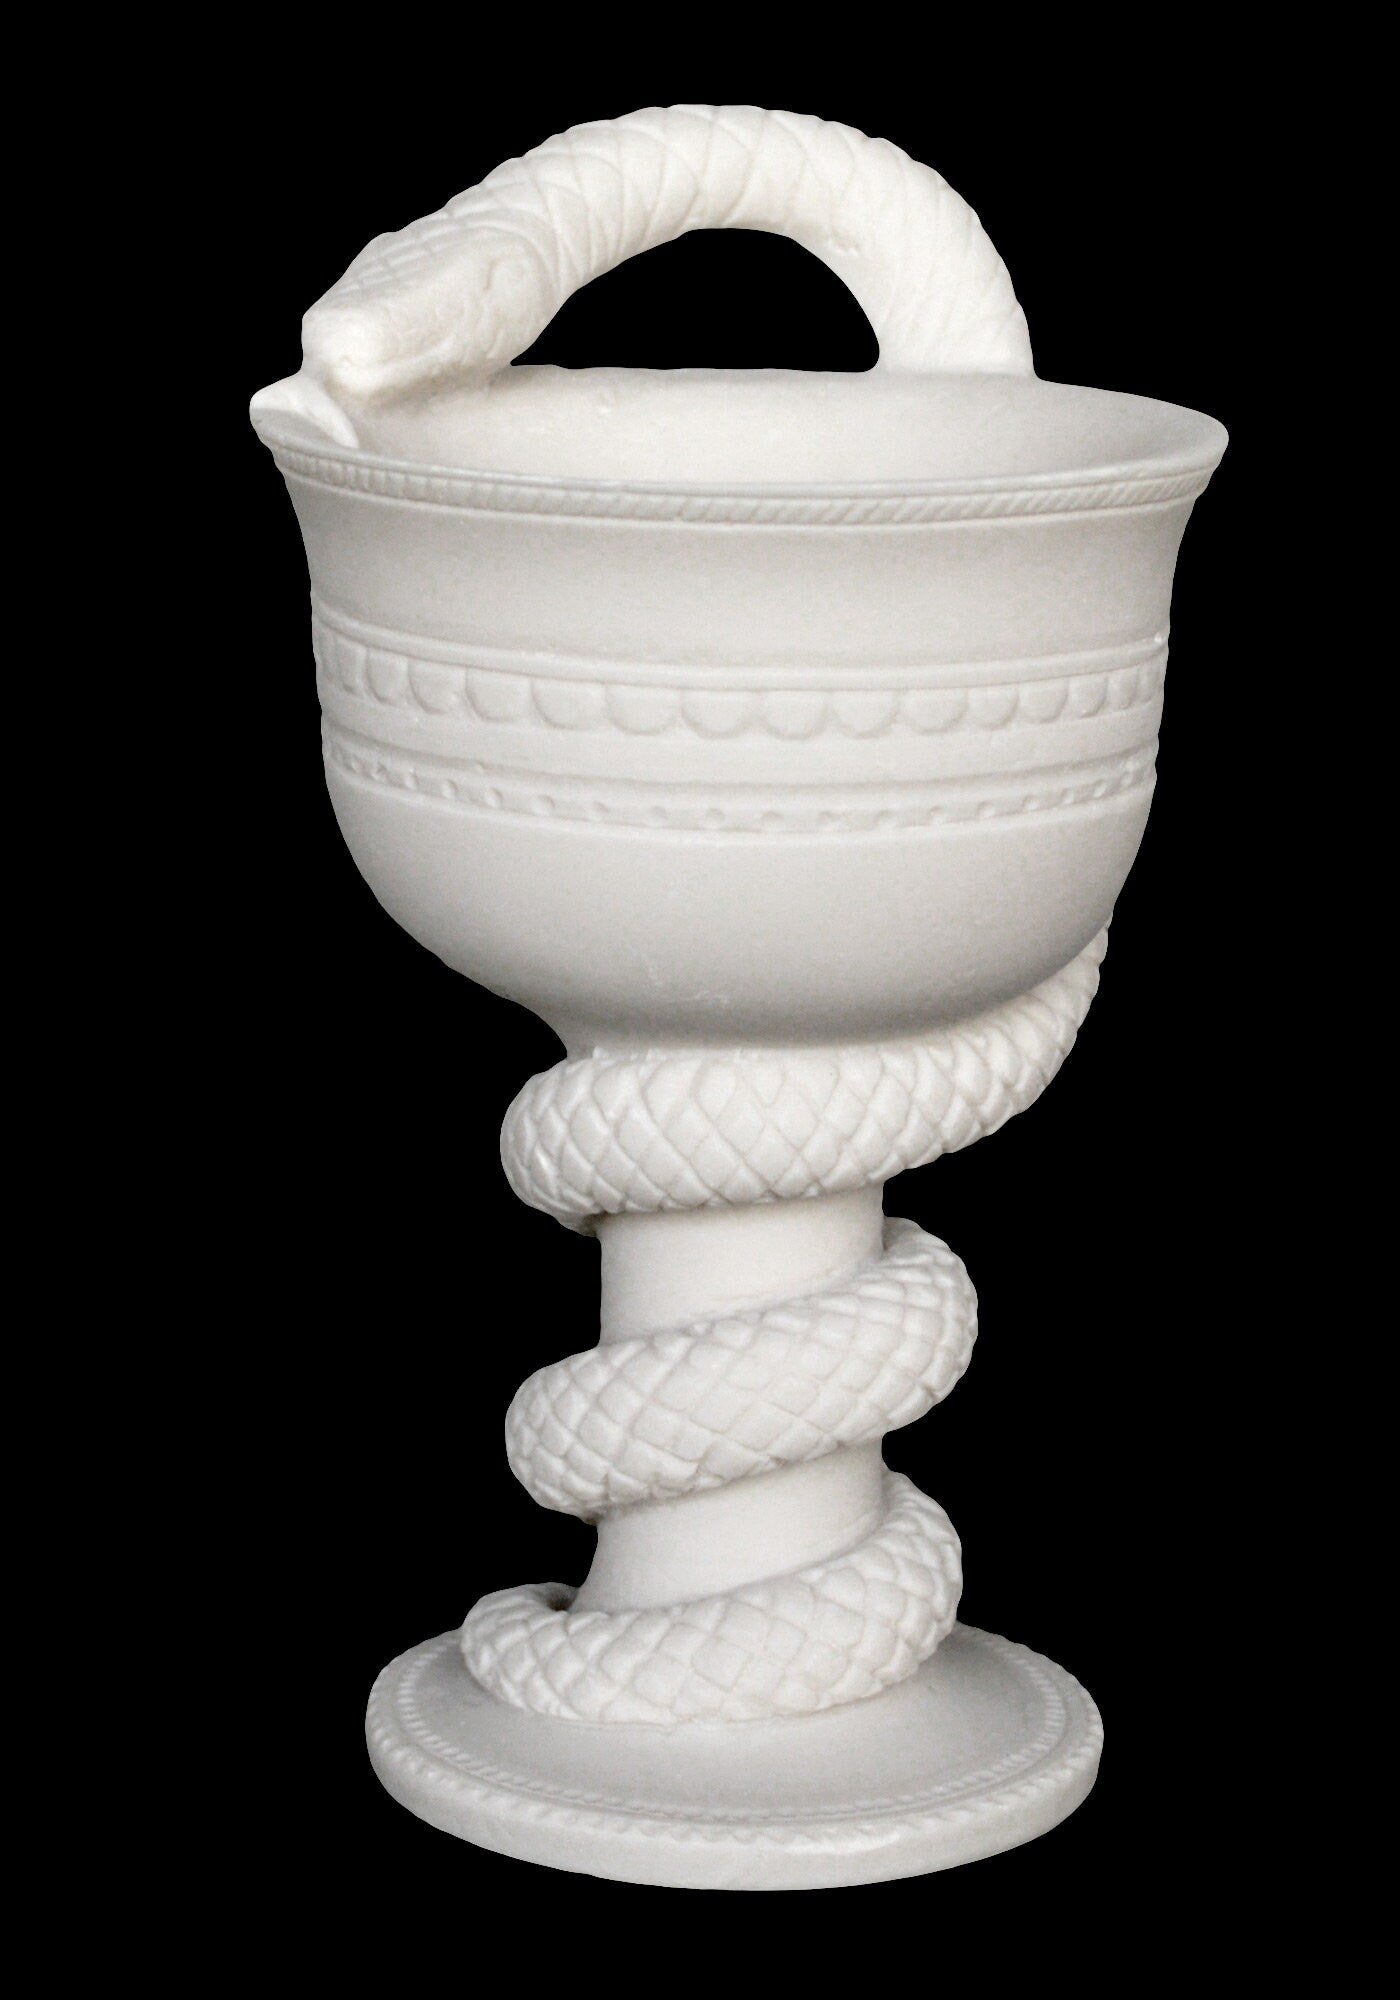 Cup with Snake Design, Symbol of Healing, Guardian of Sacred Places - Alabaster Sculpture